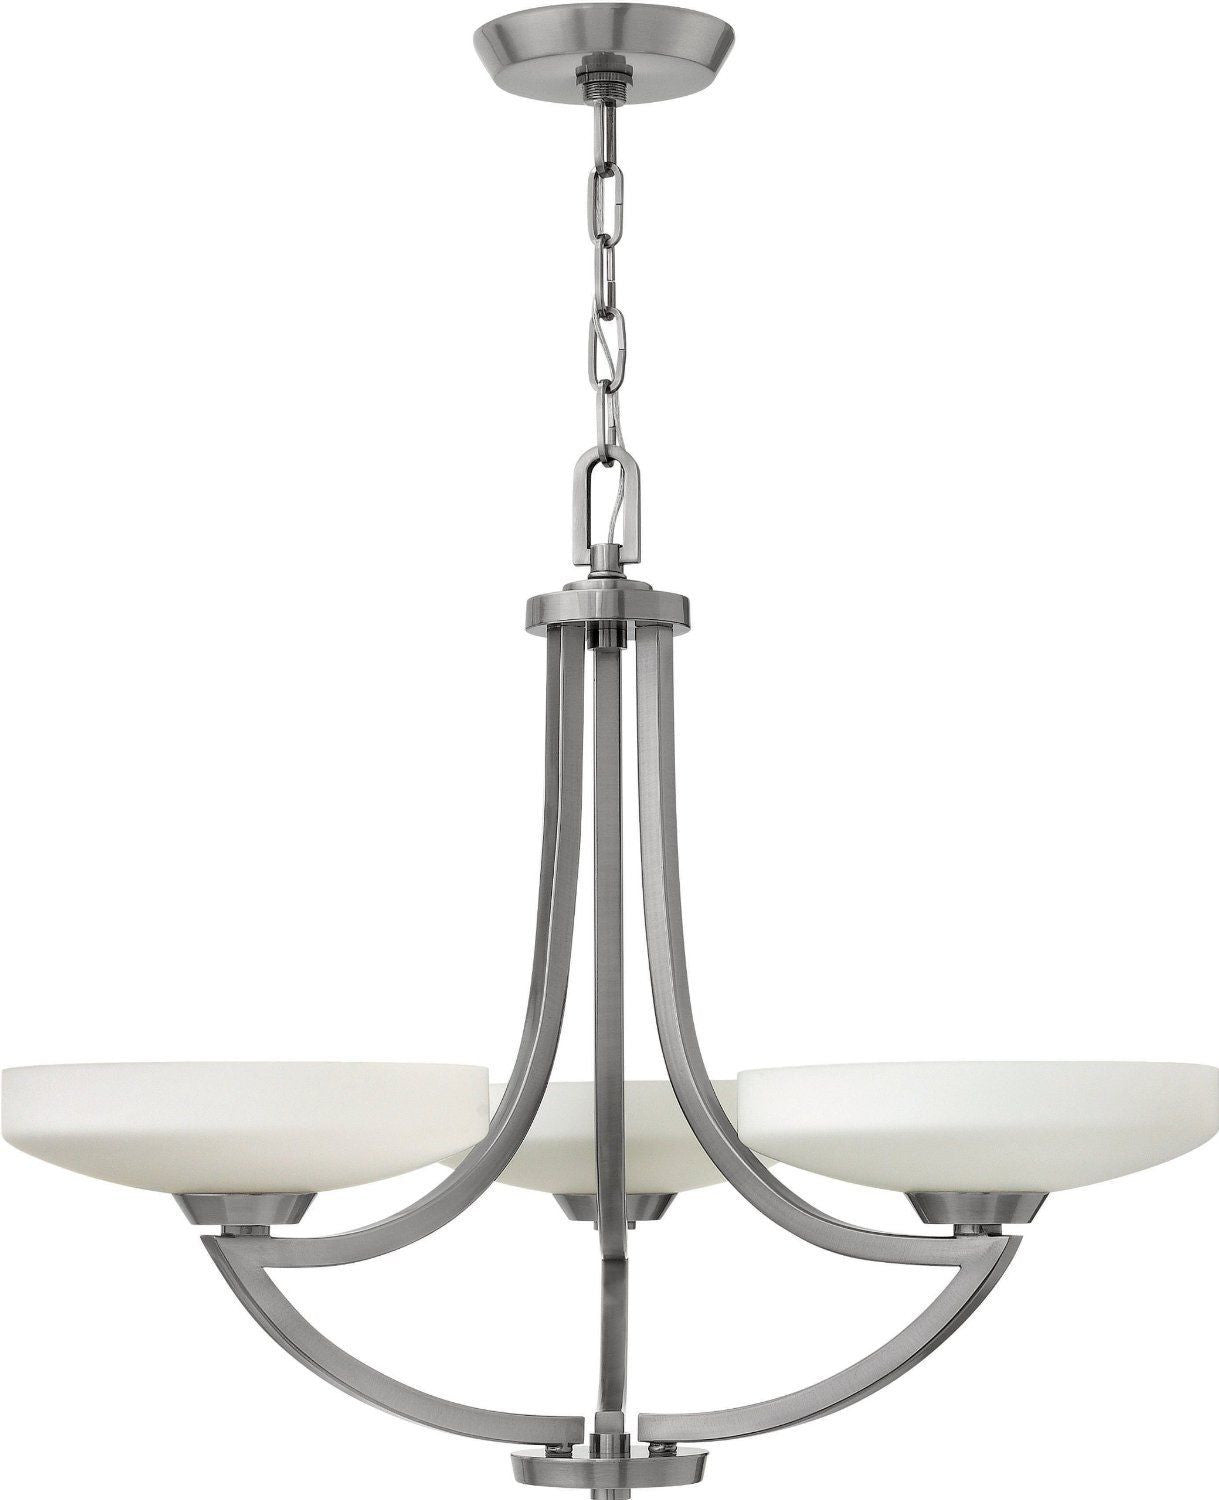 Hinkley Lighting 3963PL Darien Collection Three Light Hanging Chandelier in Polished Antique Nickel Finish